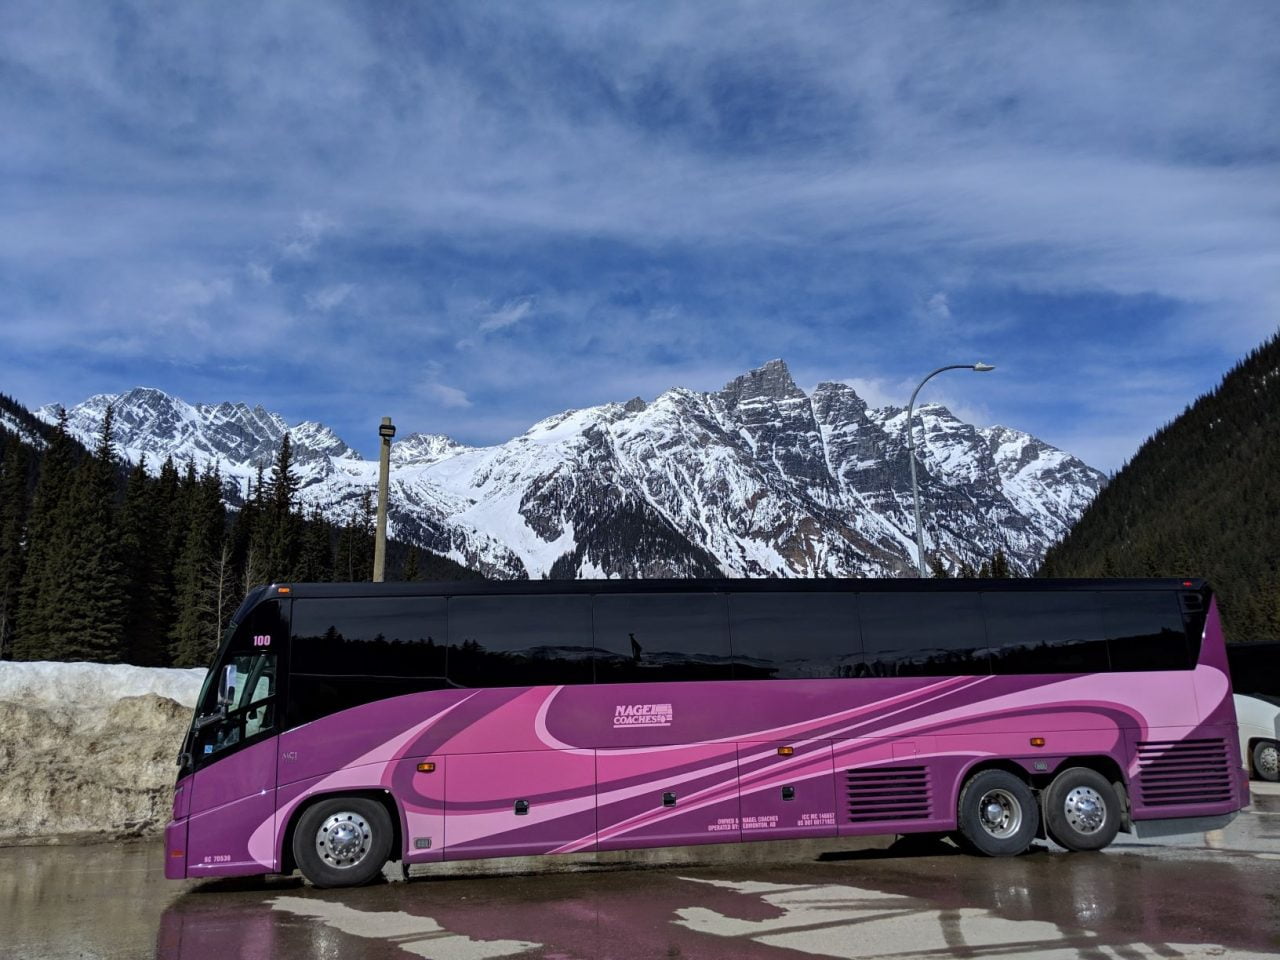 Nagel Coach in Rogers Pass BC with snowy mountains